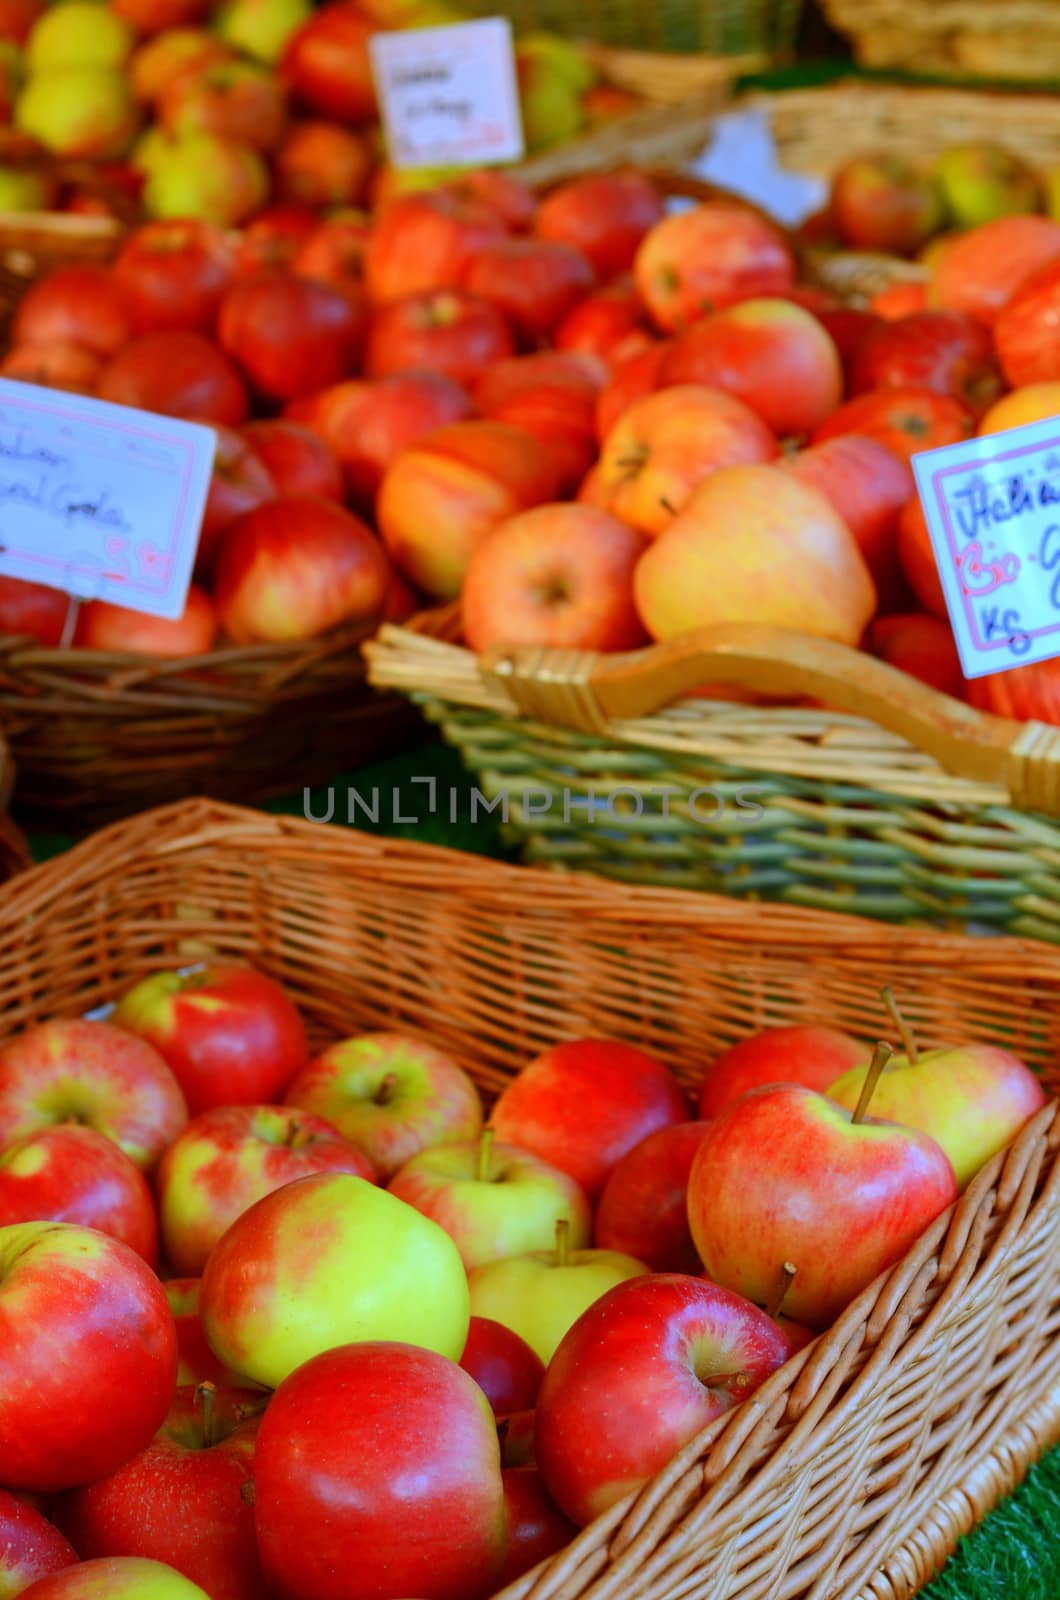 Food And Retail Image Of Baskets Of Apples In A Marketplace